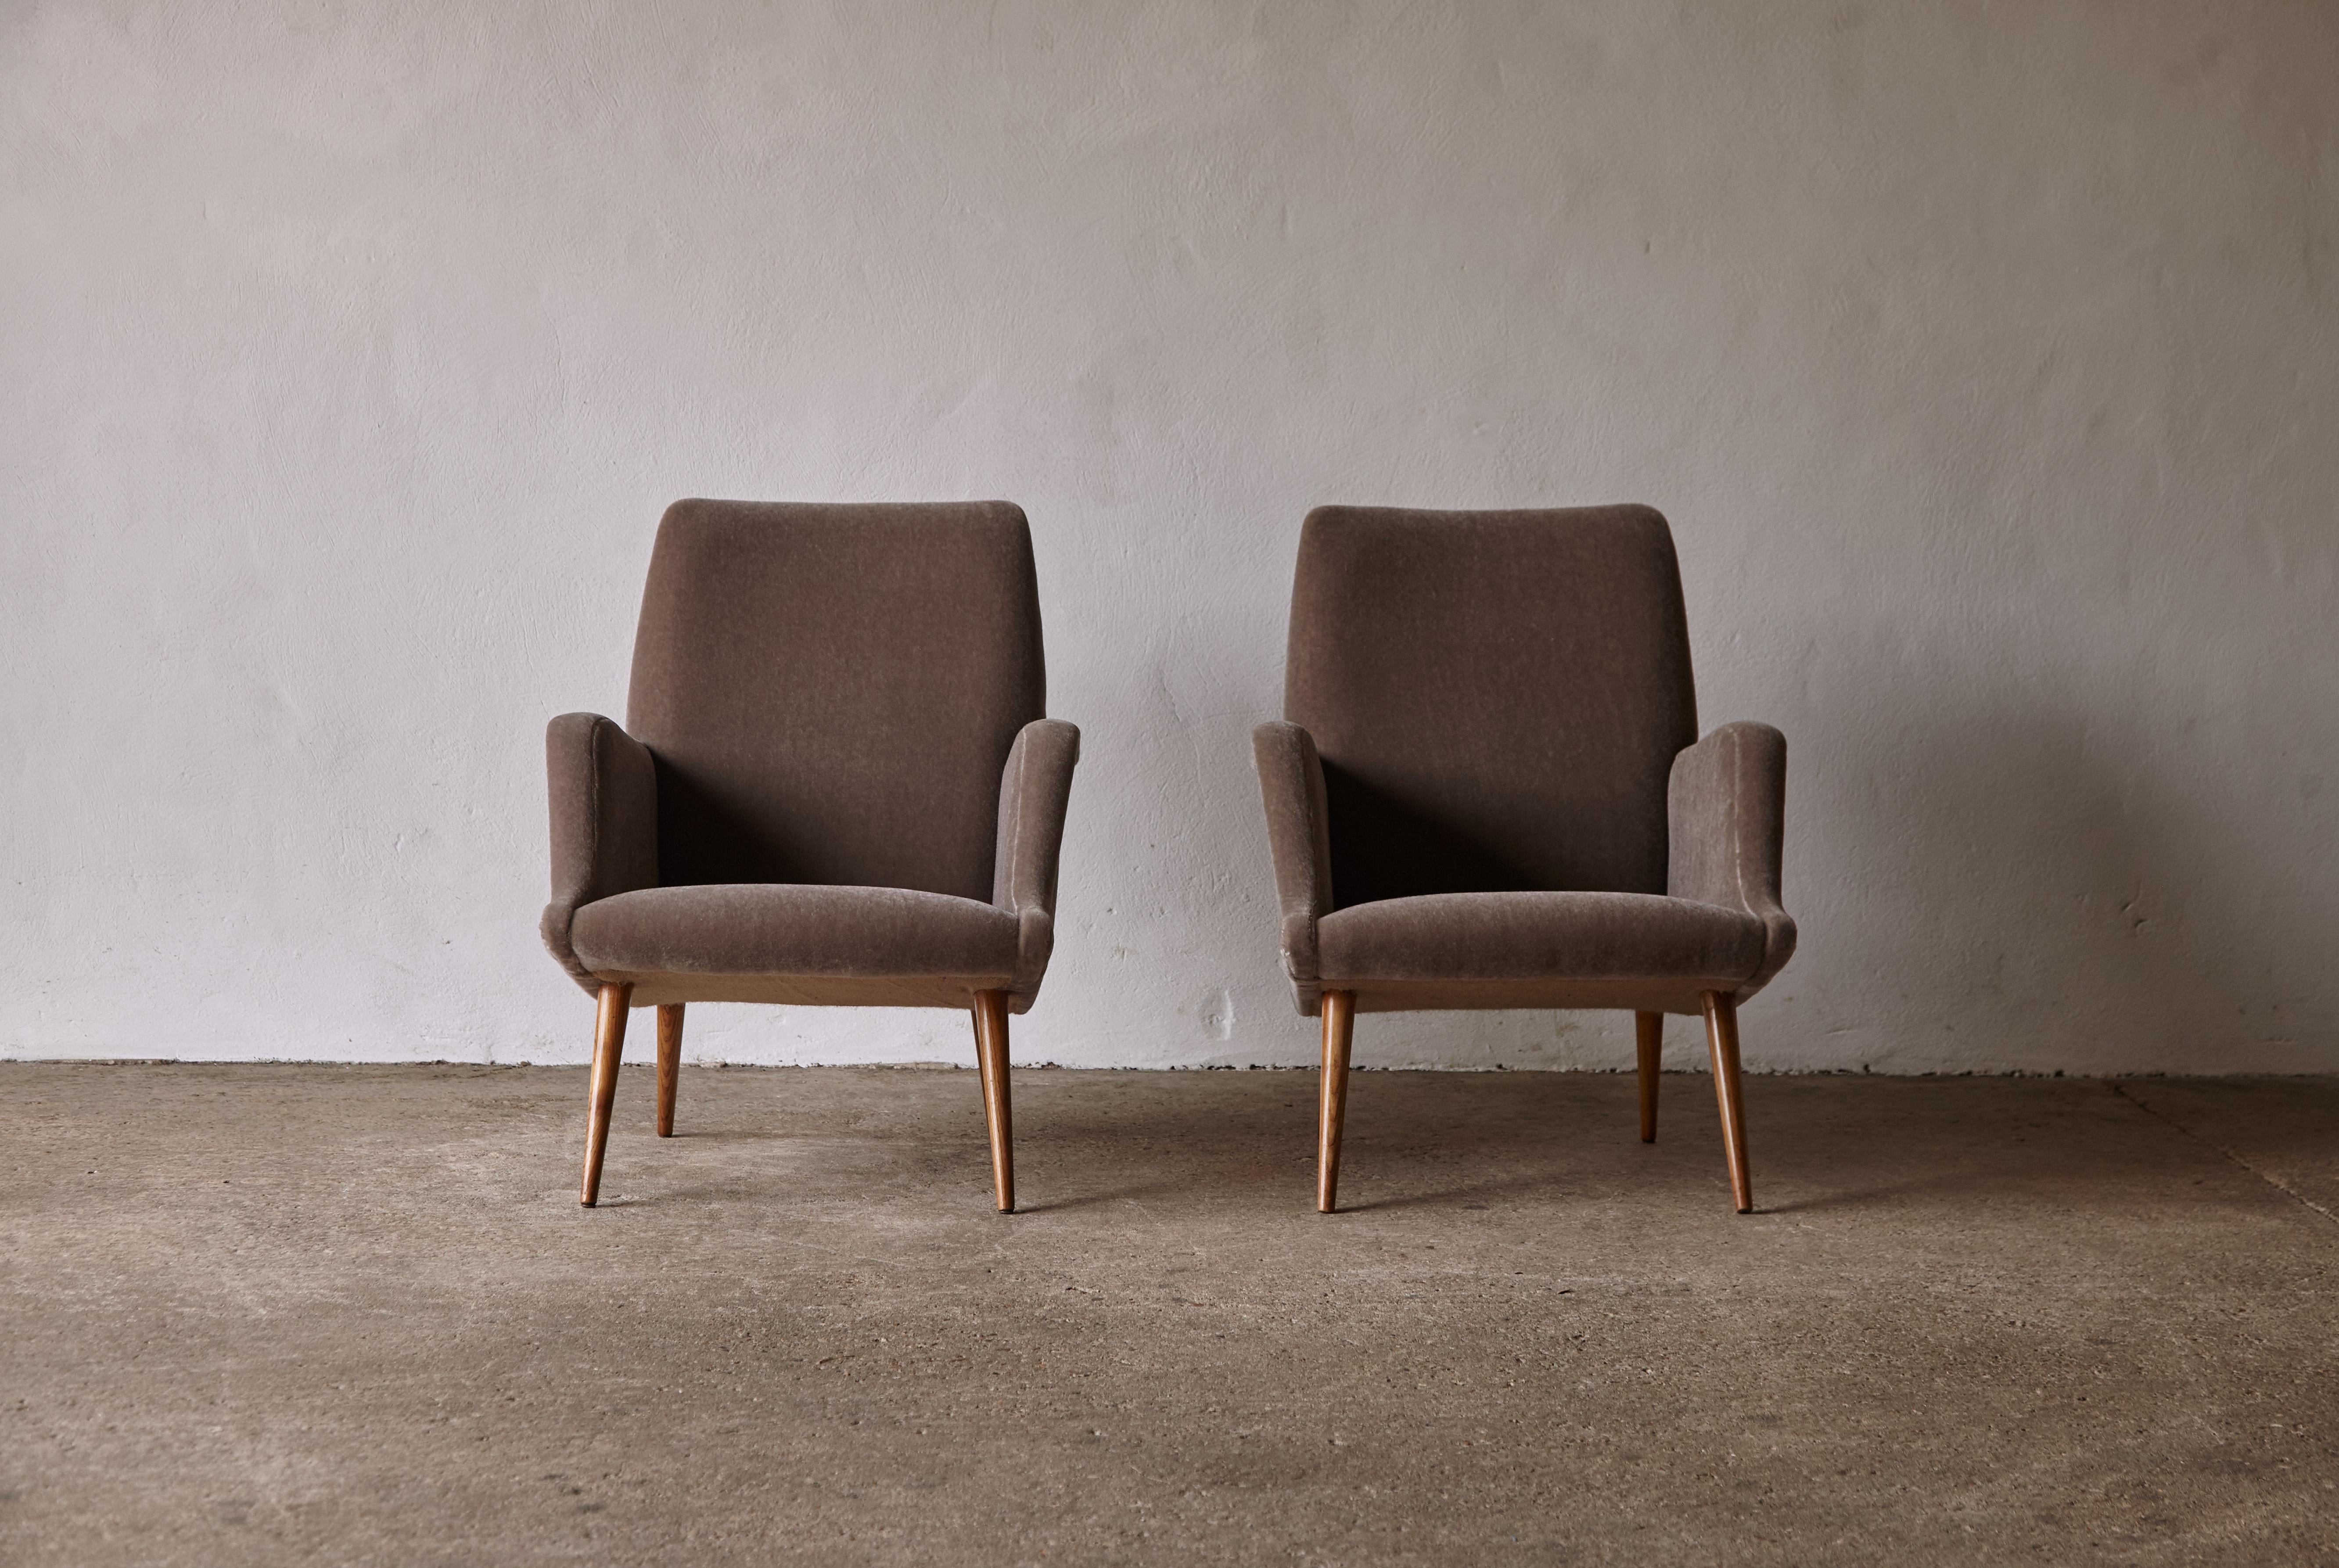 Carlo de Carli Model 806 Chairs, Produced by Cassina, Italy, 1950s In Good Condition For Sale In London, GB